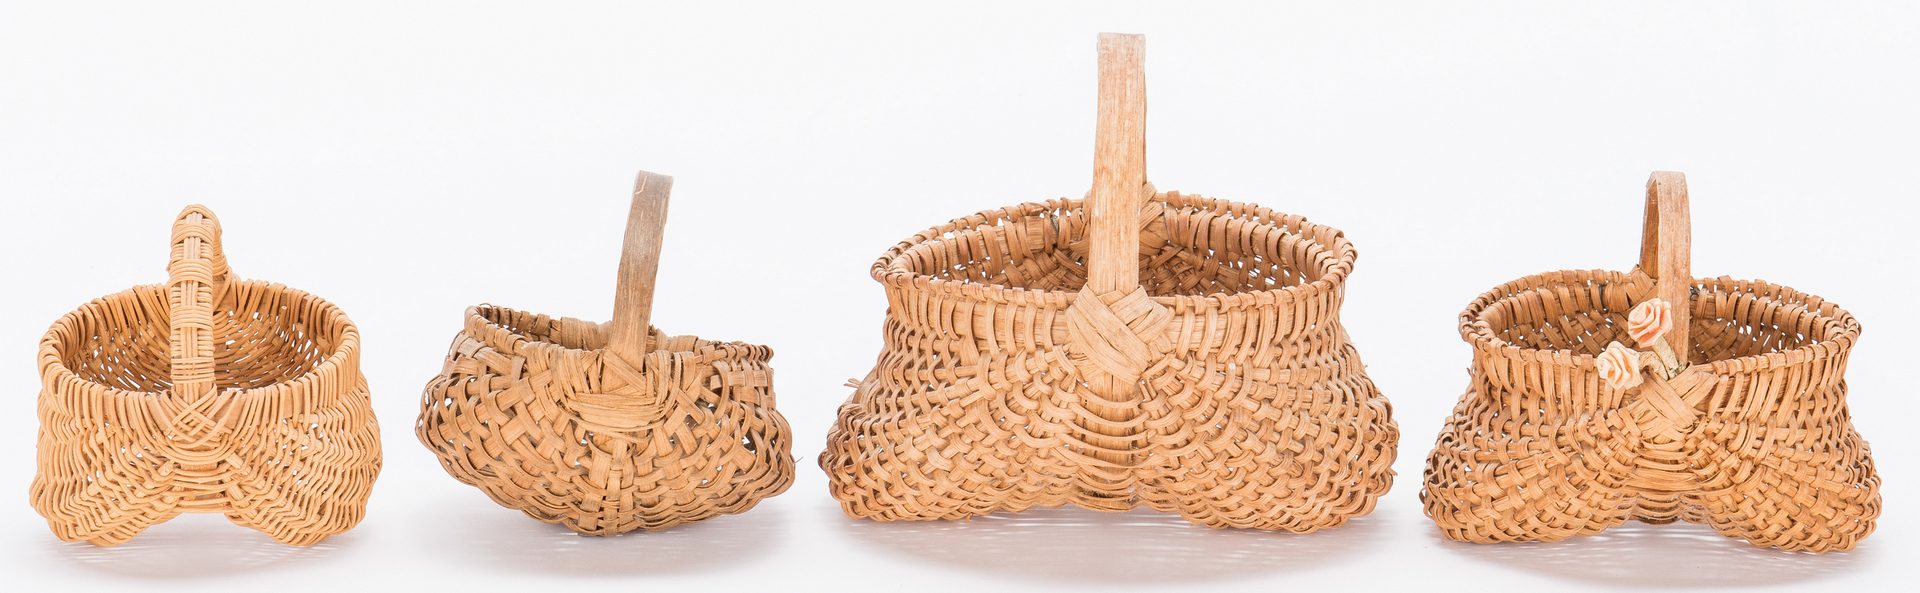 Lot 386: Grouping of 13 Southern Baskets, incl. miniatures